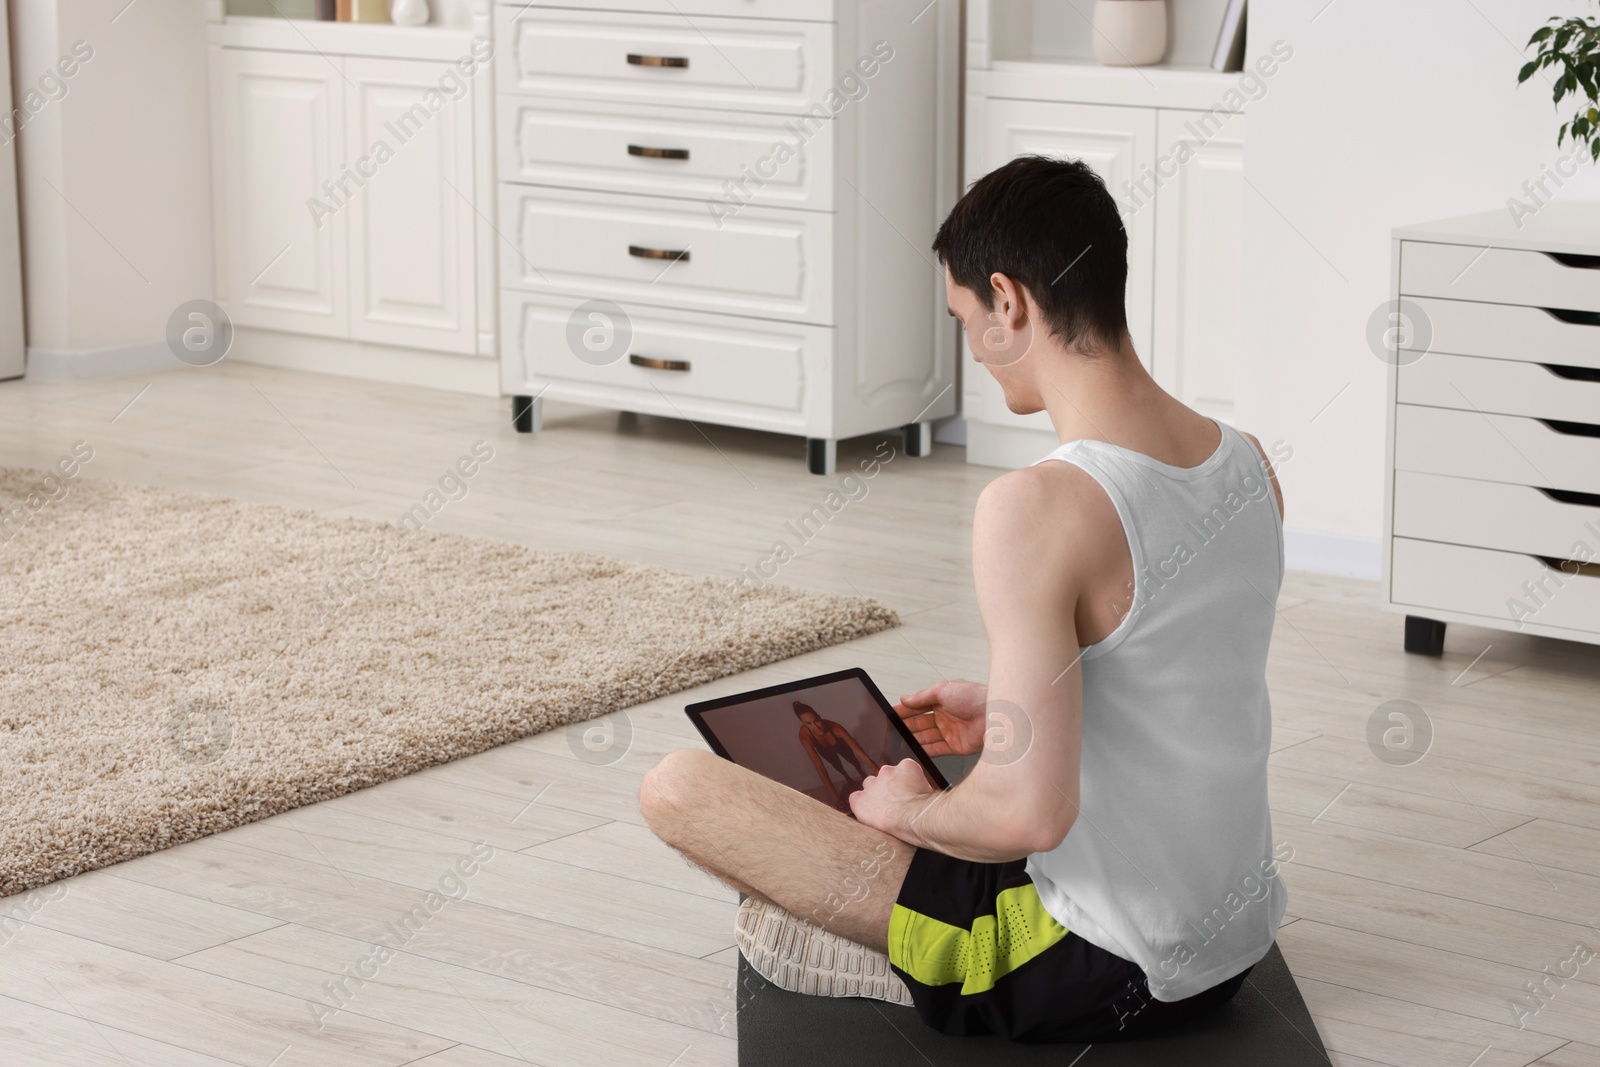 Photo of Online fitness trainer. Man watching tutorial on laptop indoors